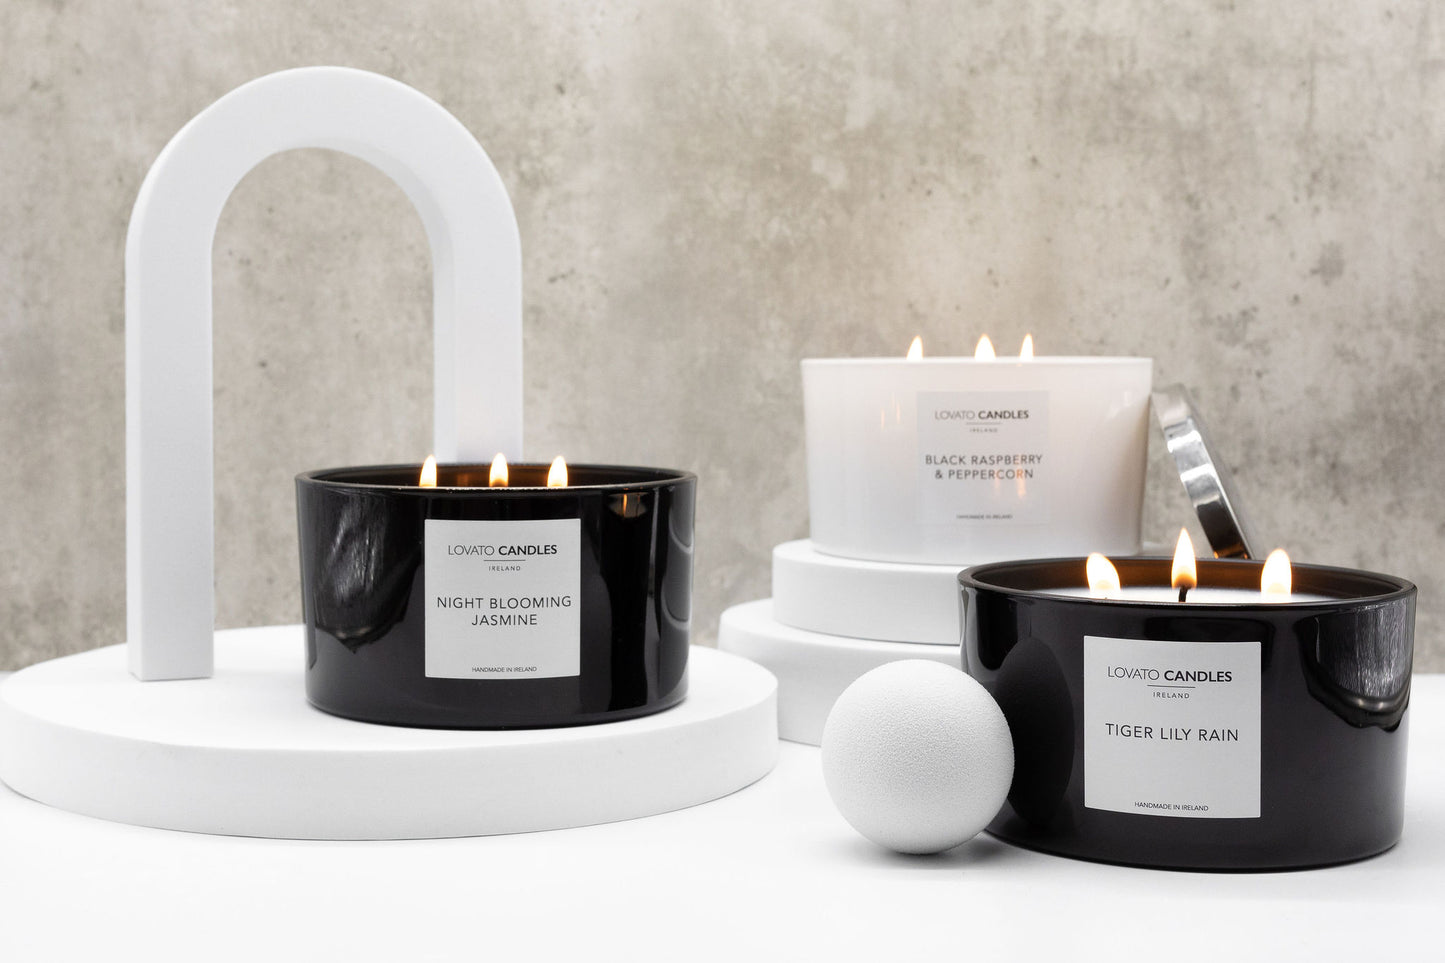 White 3-Wick Candle - Peony & Oud